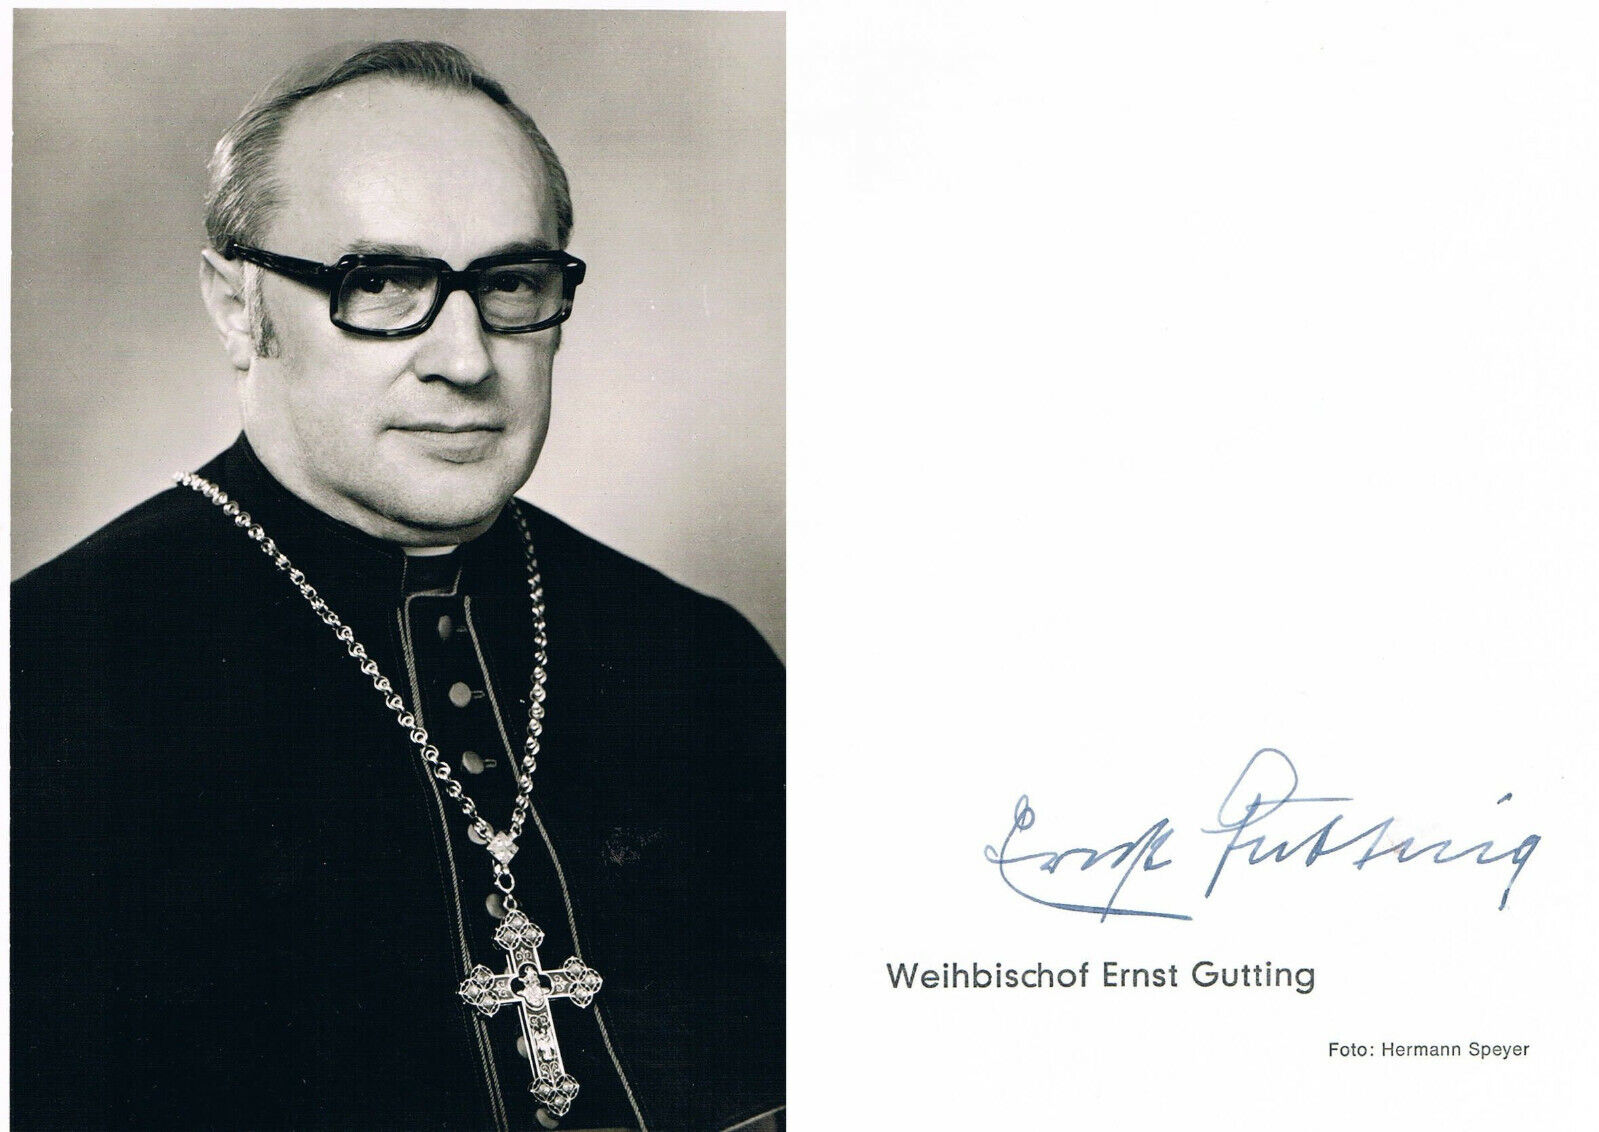 Bishop Ernst Gutting 1919-2013 autograph signed Photo Poster painting 4x6